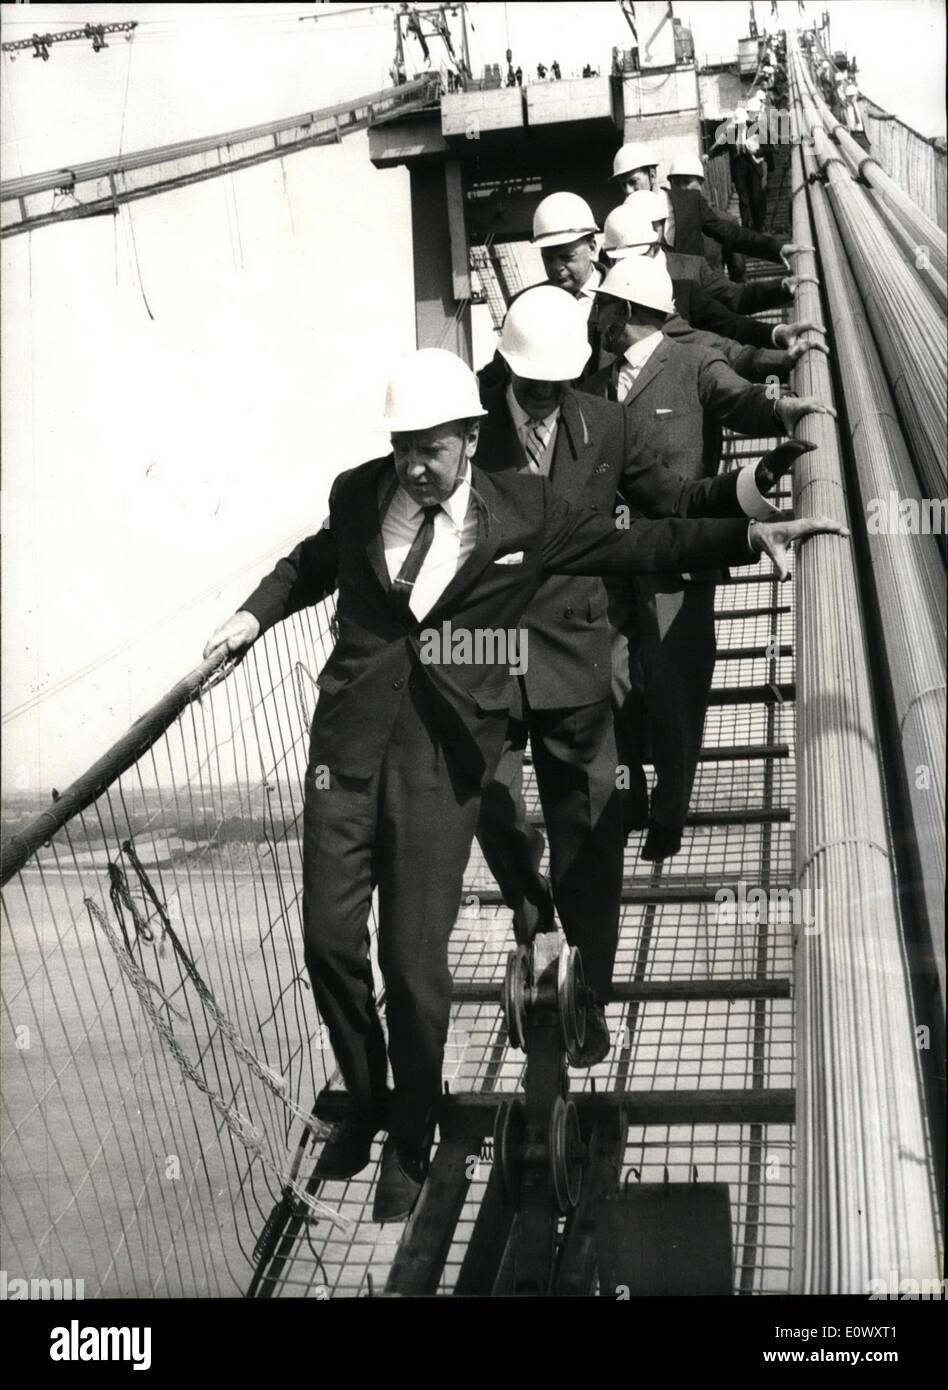 Jun. 06, 1964 - Mr. Marples on a Tightrope: Yesterday, Transport Minister Mr. Ernest Marples paid a visit to the new Severn Bridge under construction near Gloucester, which will form part of the London SOuth Wales Motorway and will form a vital link between England and Wales. Mr Marples went to the top of the bridge to watch the spinning of the main suspension cables. Photo shows Mr. Maples walks along a walkway at the topof the new Severn Bridge. Stock Photo